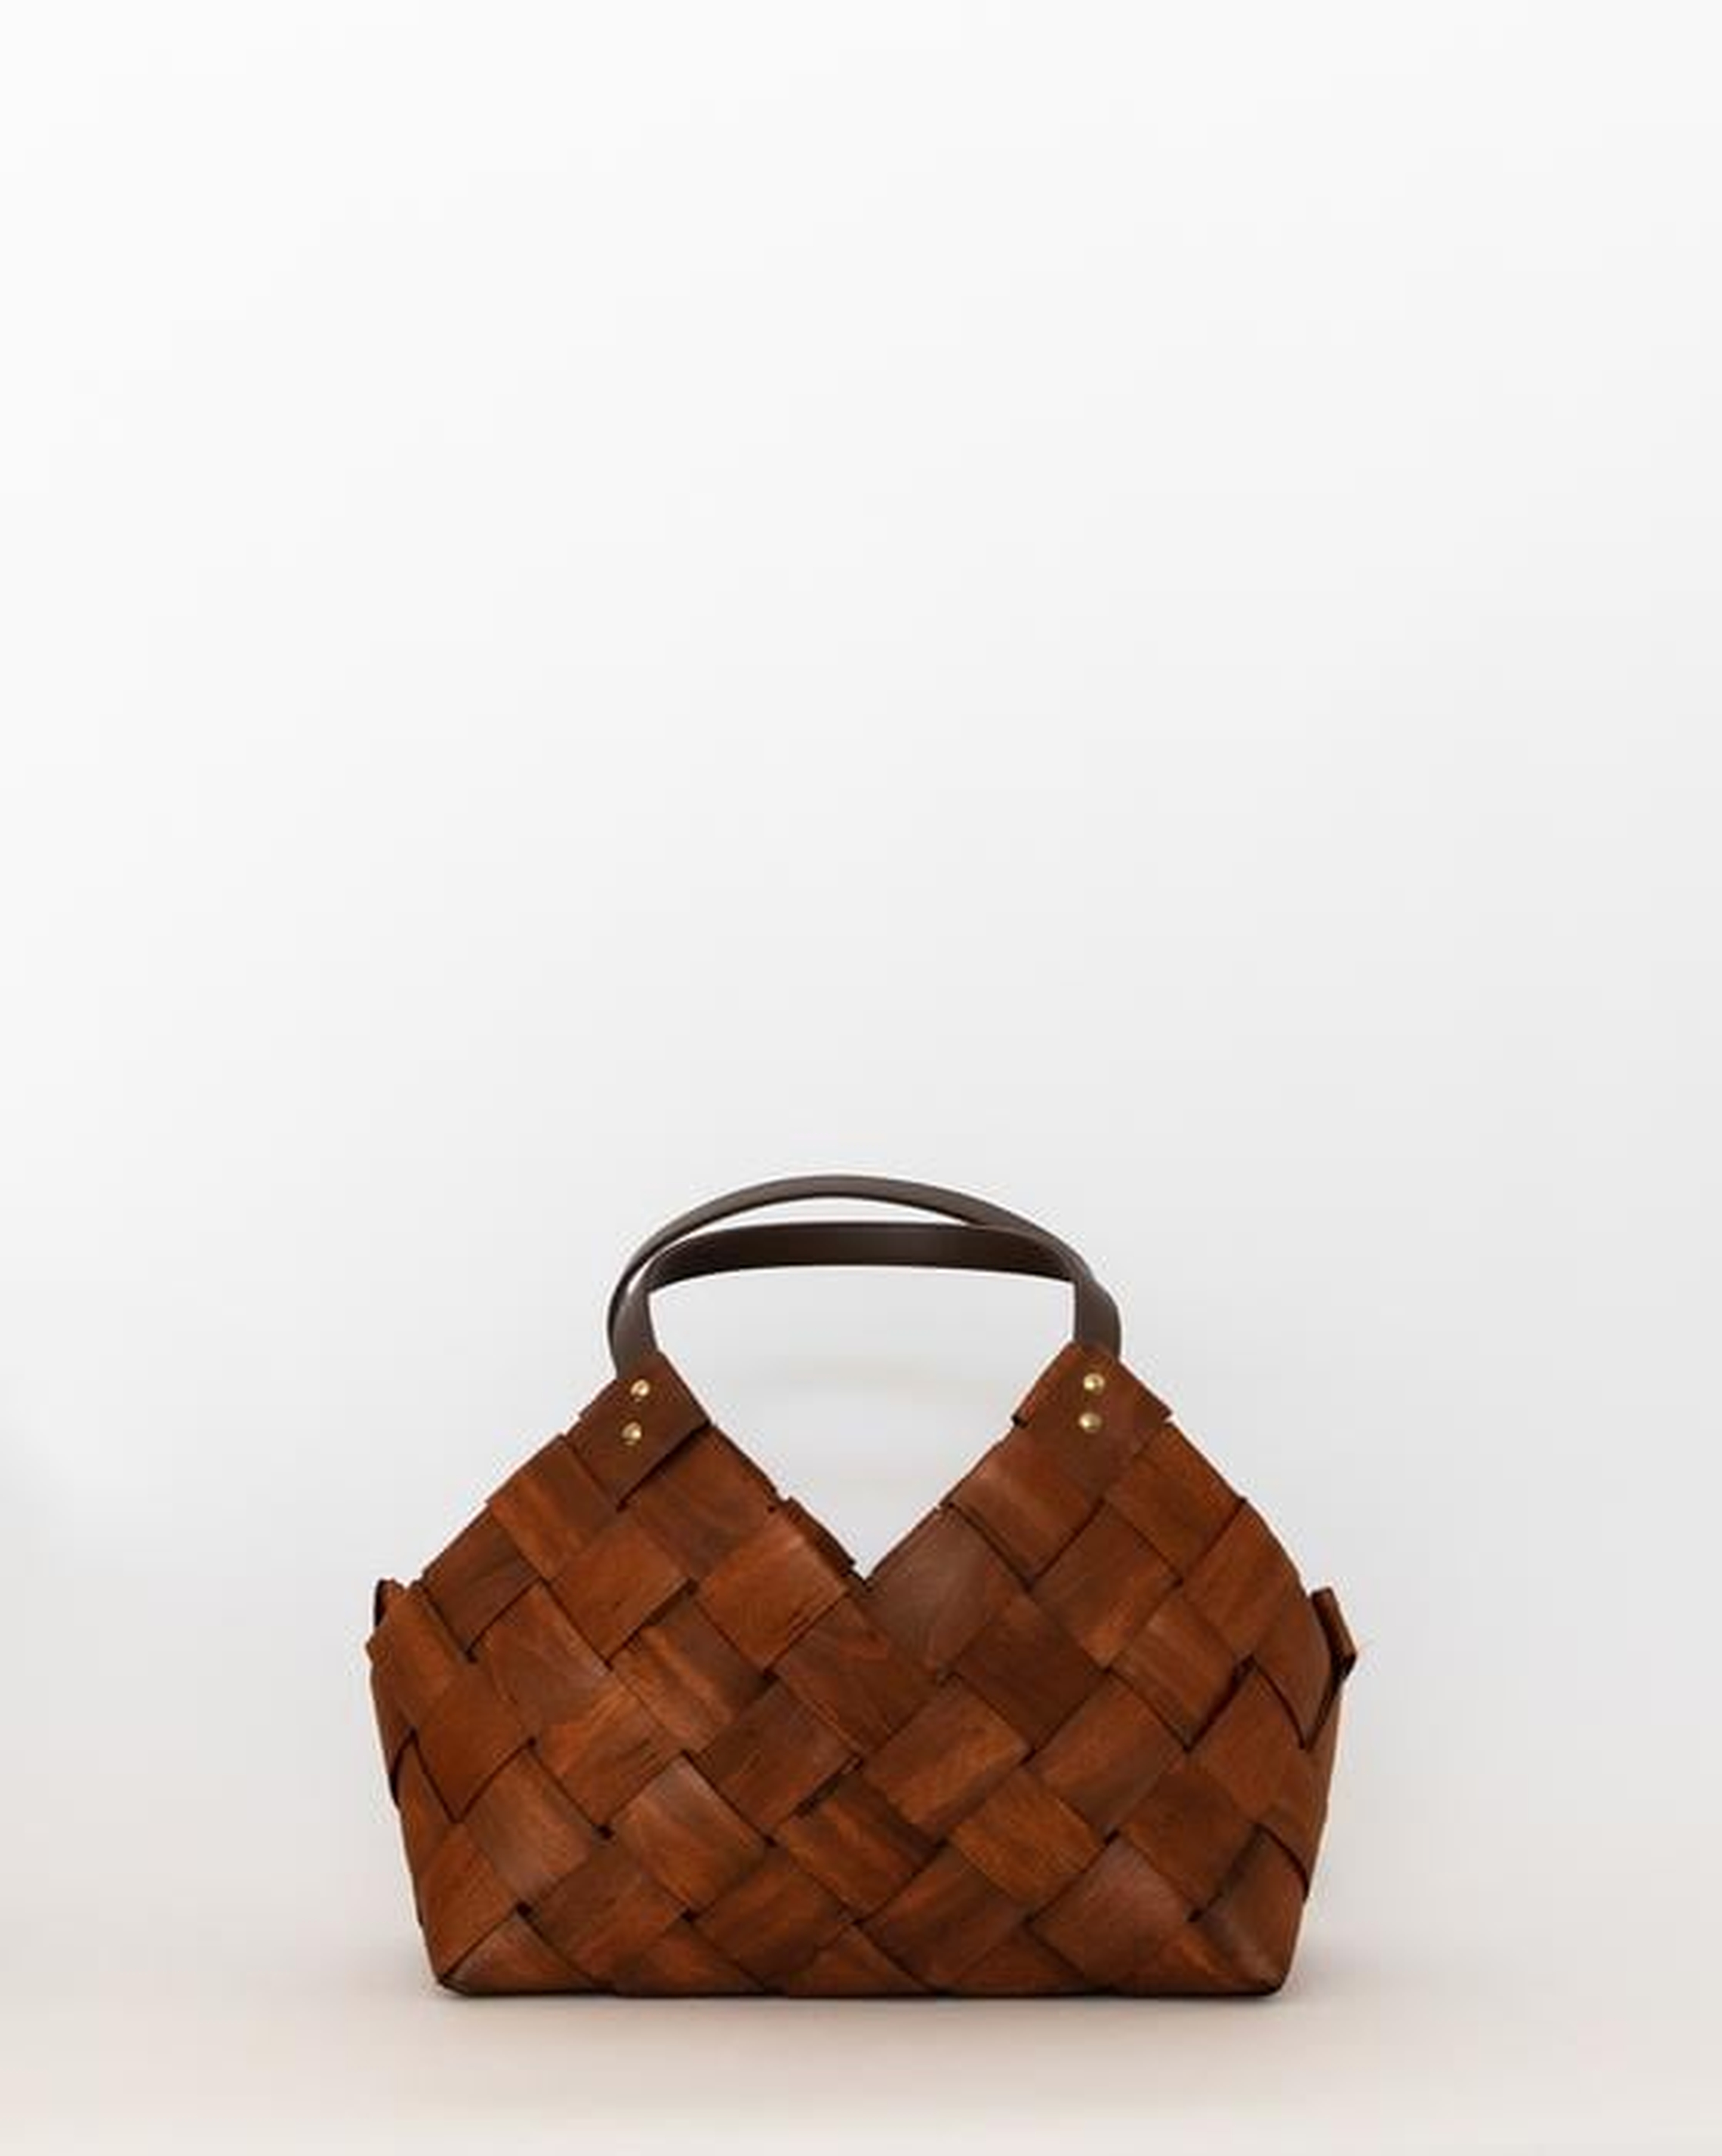 SEAGRASS & LEATHER BASKET - Medium - McGee & Co.